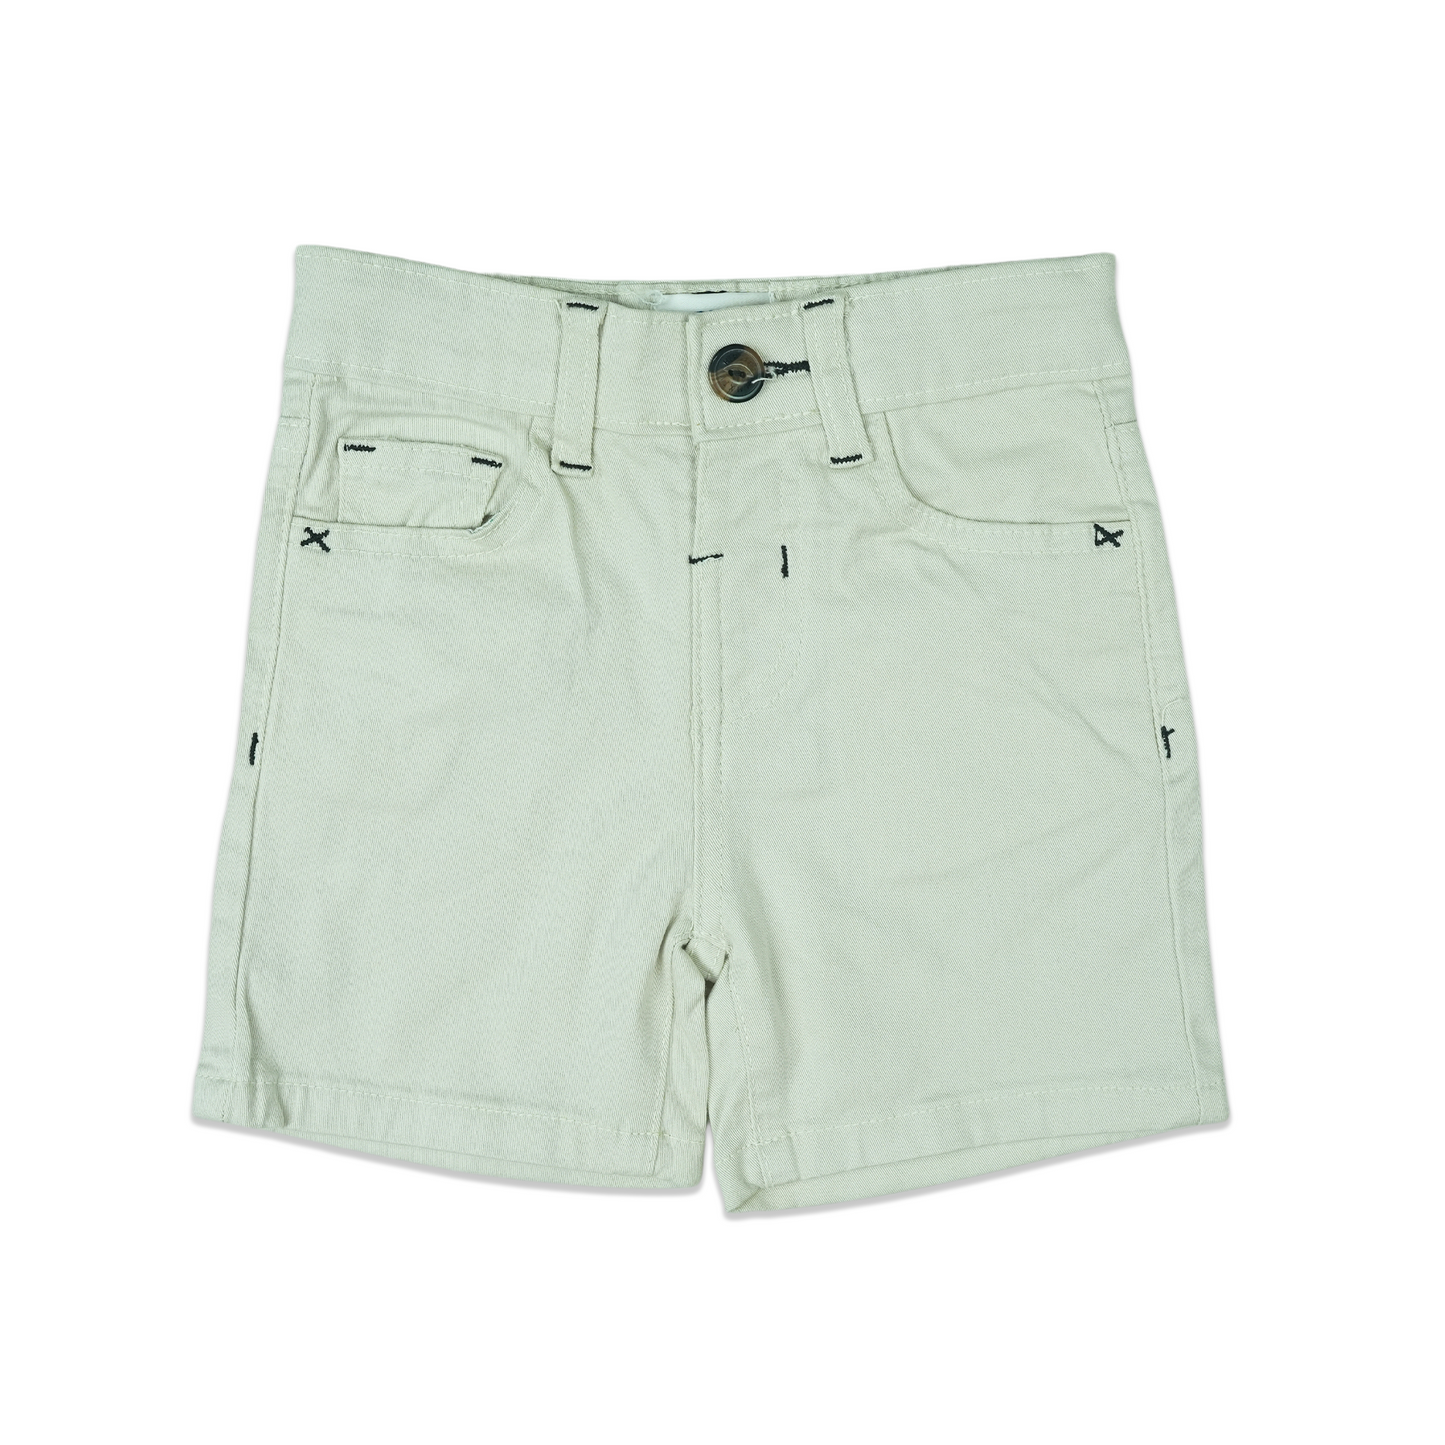 White colored shorts for boys - Miniwears